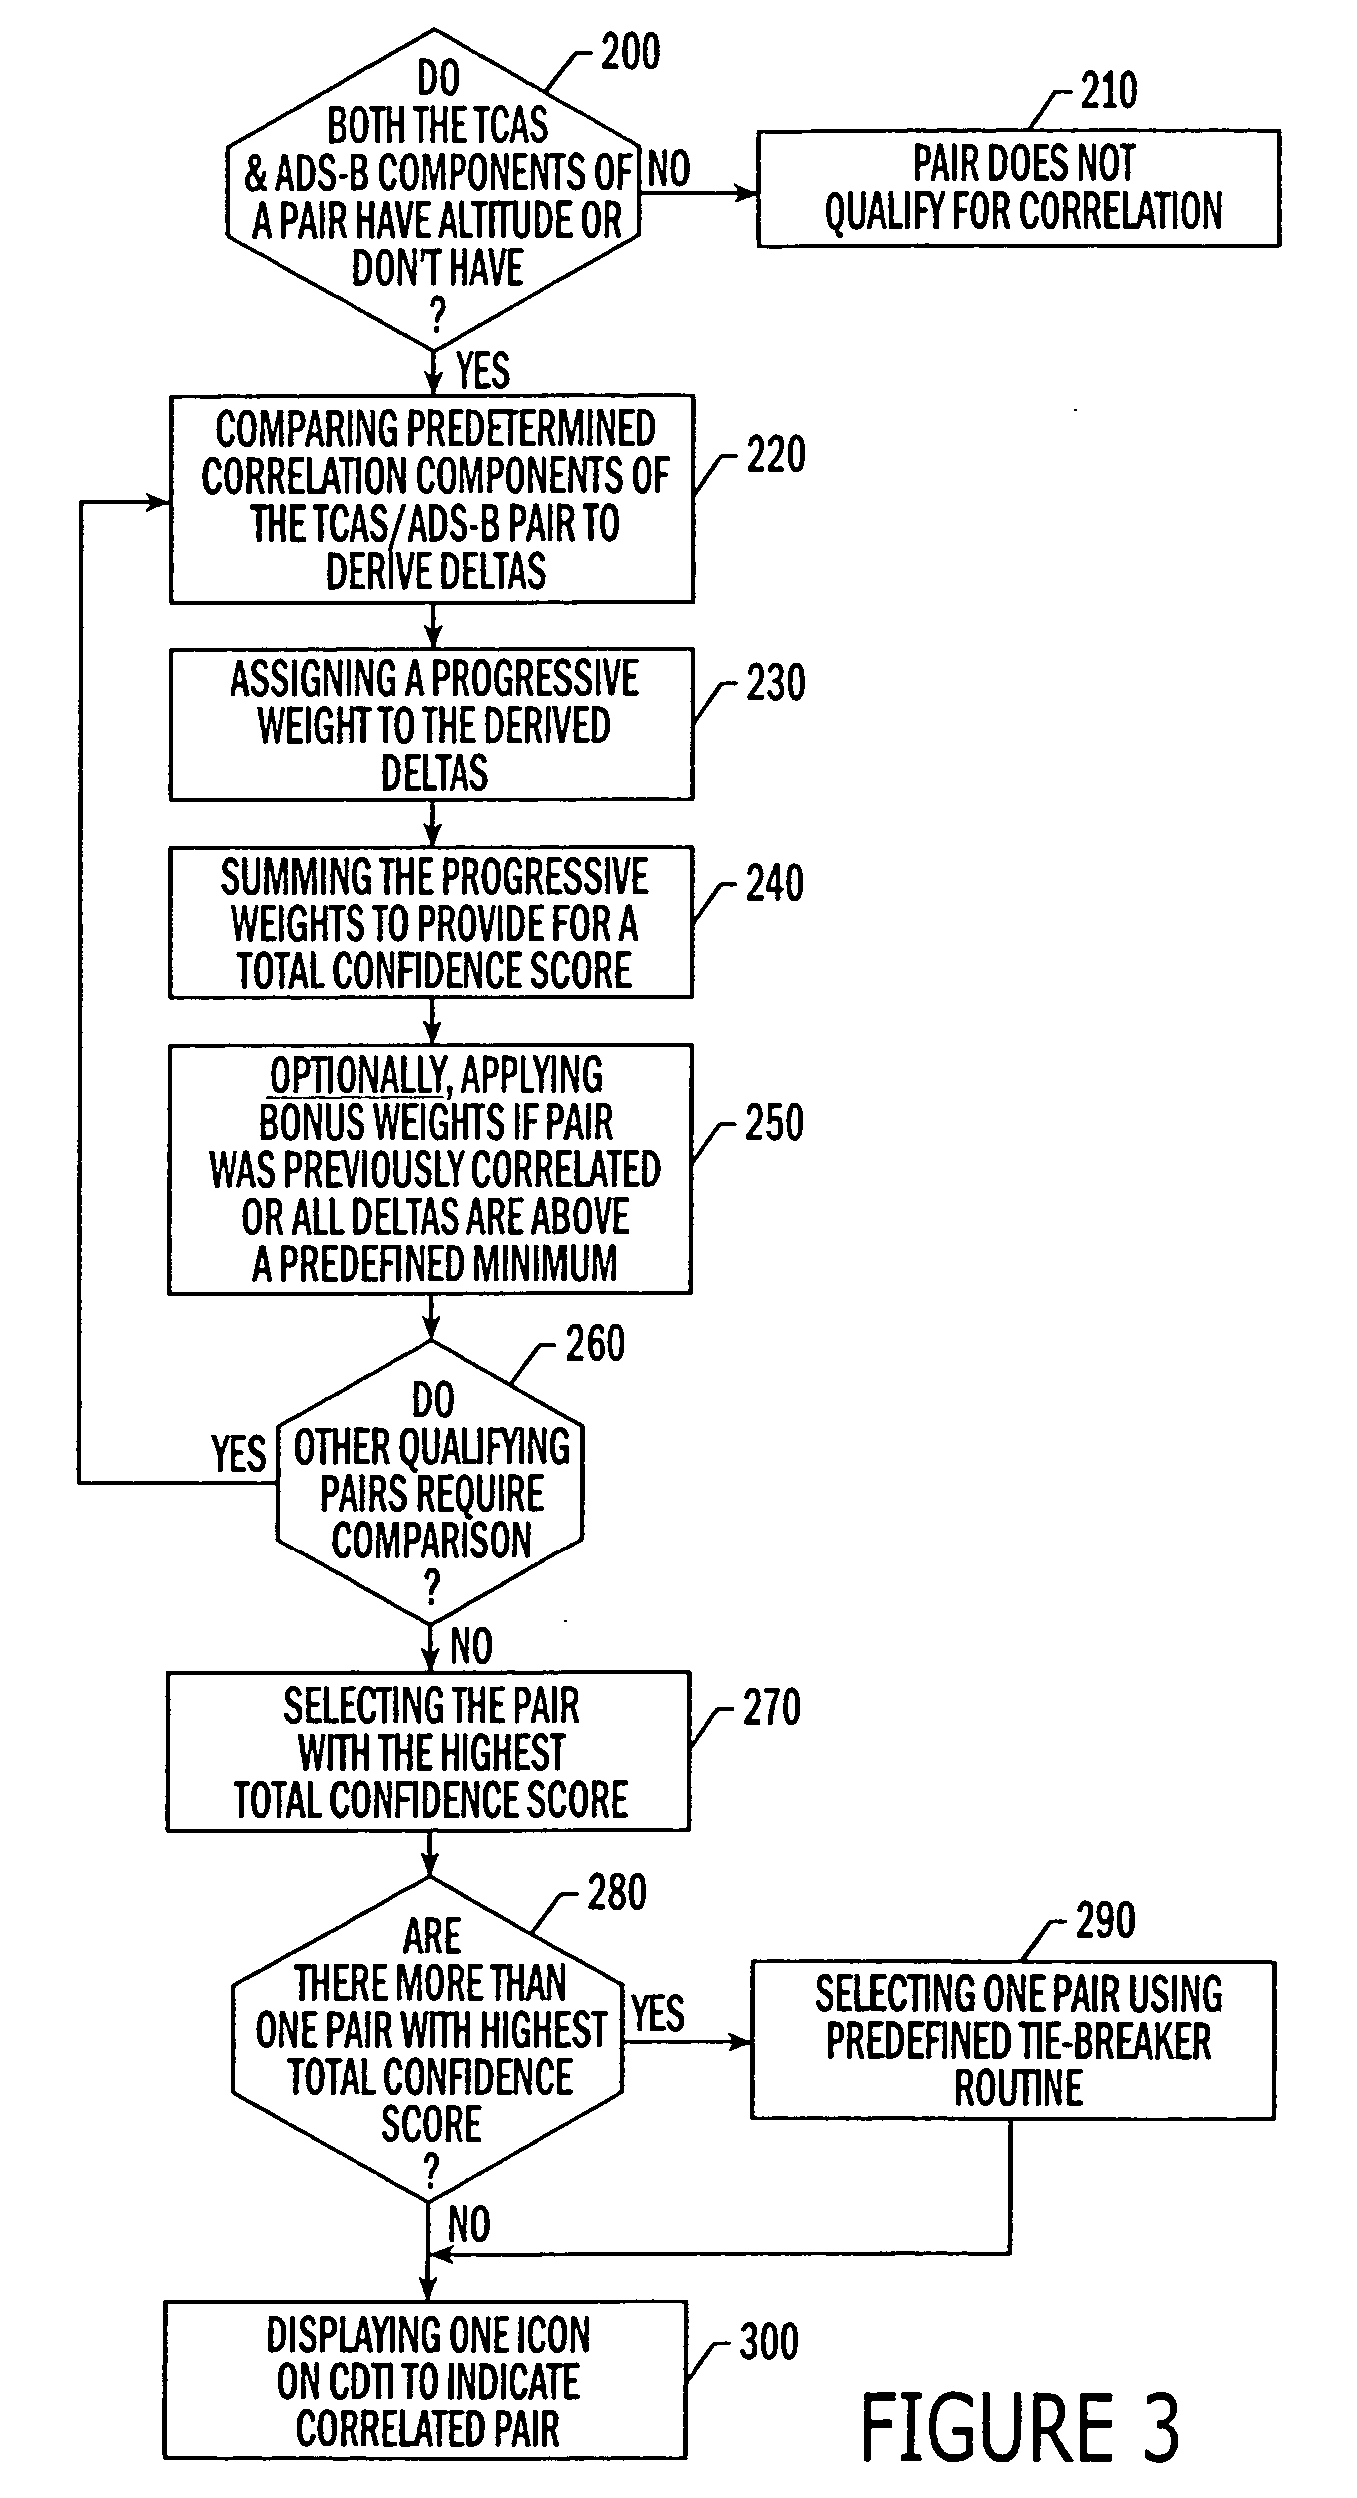 Systems and methods for correlation in an air traffic control system of interrogation-based target positional data and gps-based intruder positional data